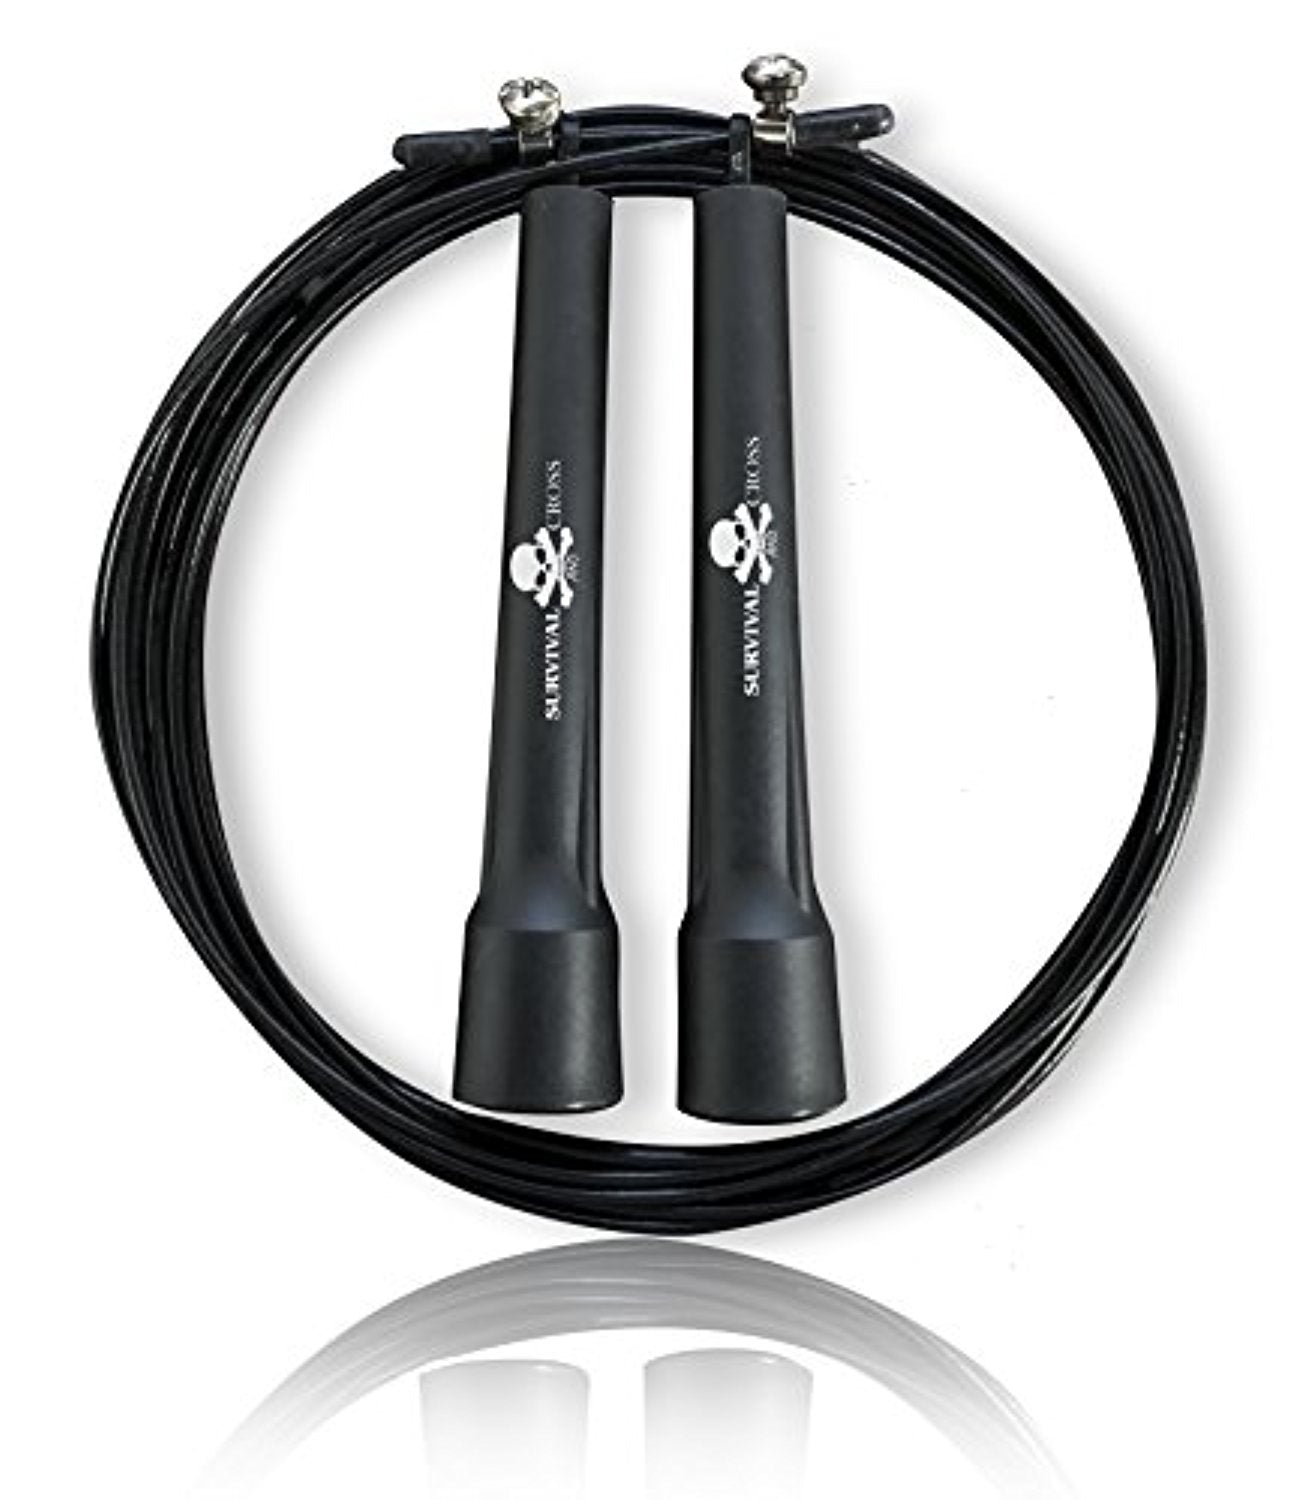 Speed Rope - Premium Quality - Best for Crossfit Workouts, MMA & Wrestling - Everyday Crosstrain